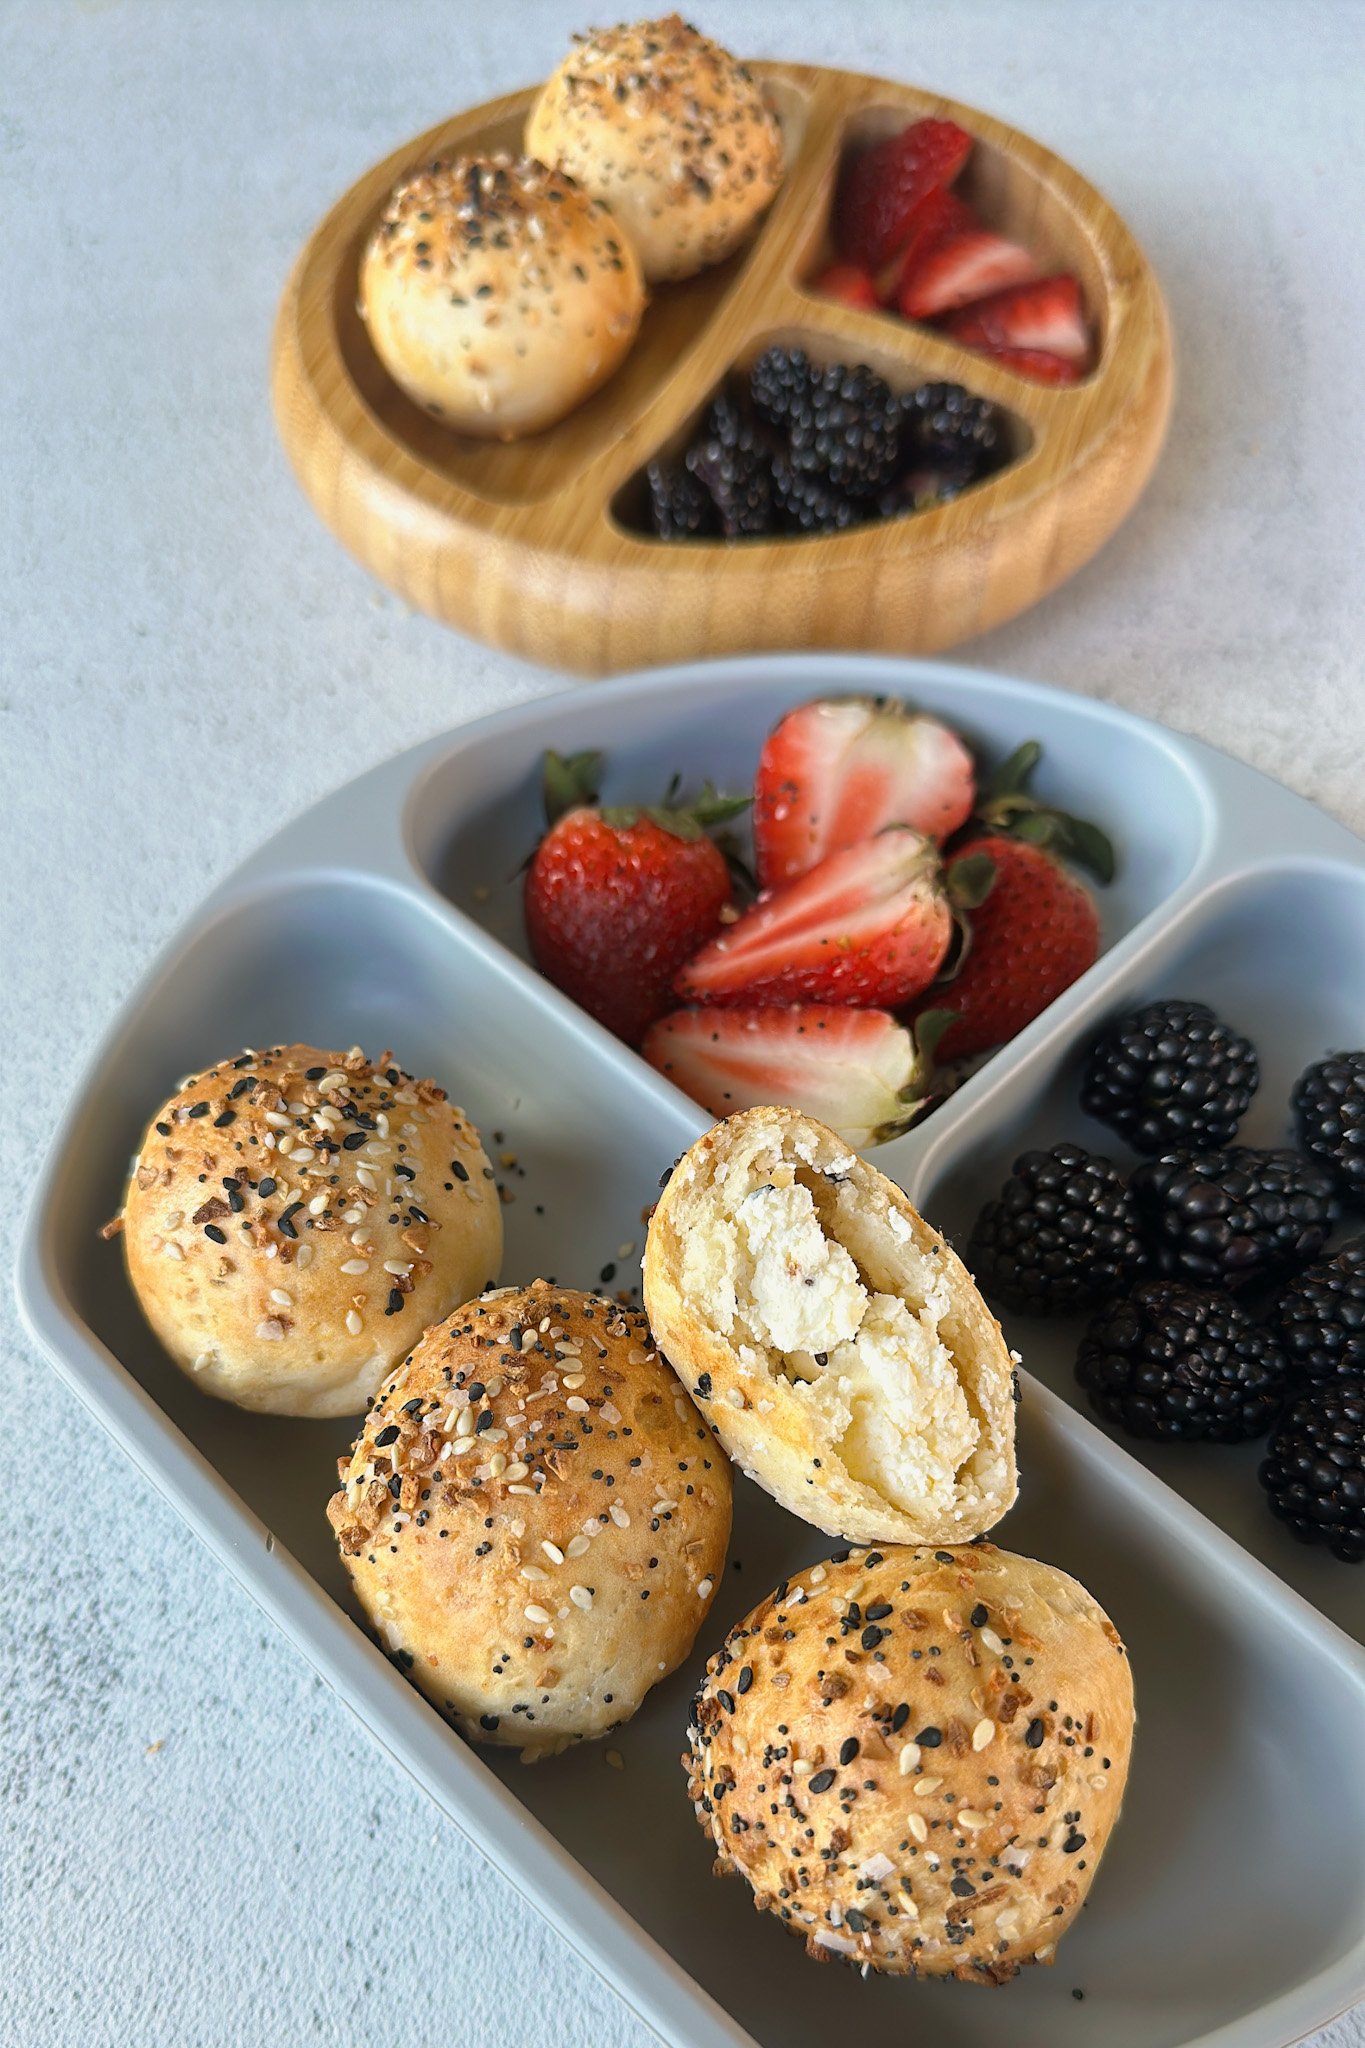 Stuffed everything bagel bites served with berries.